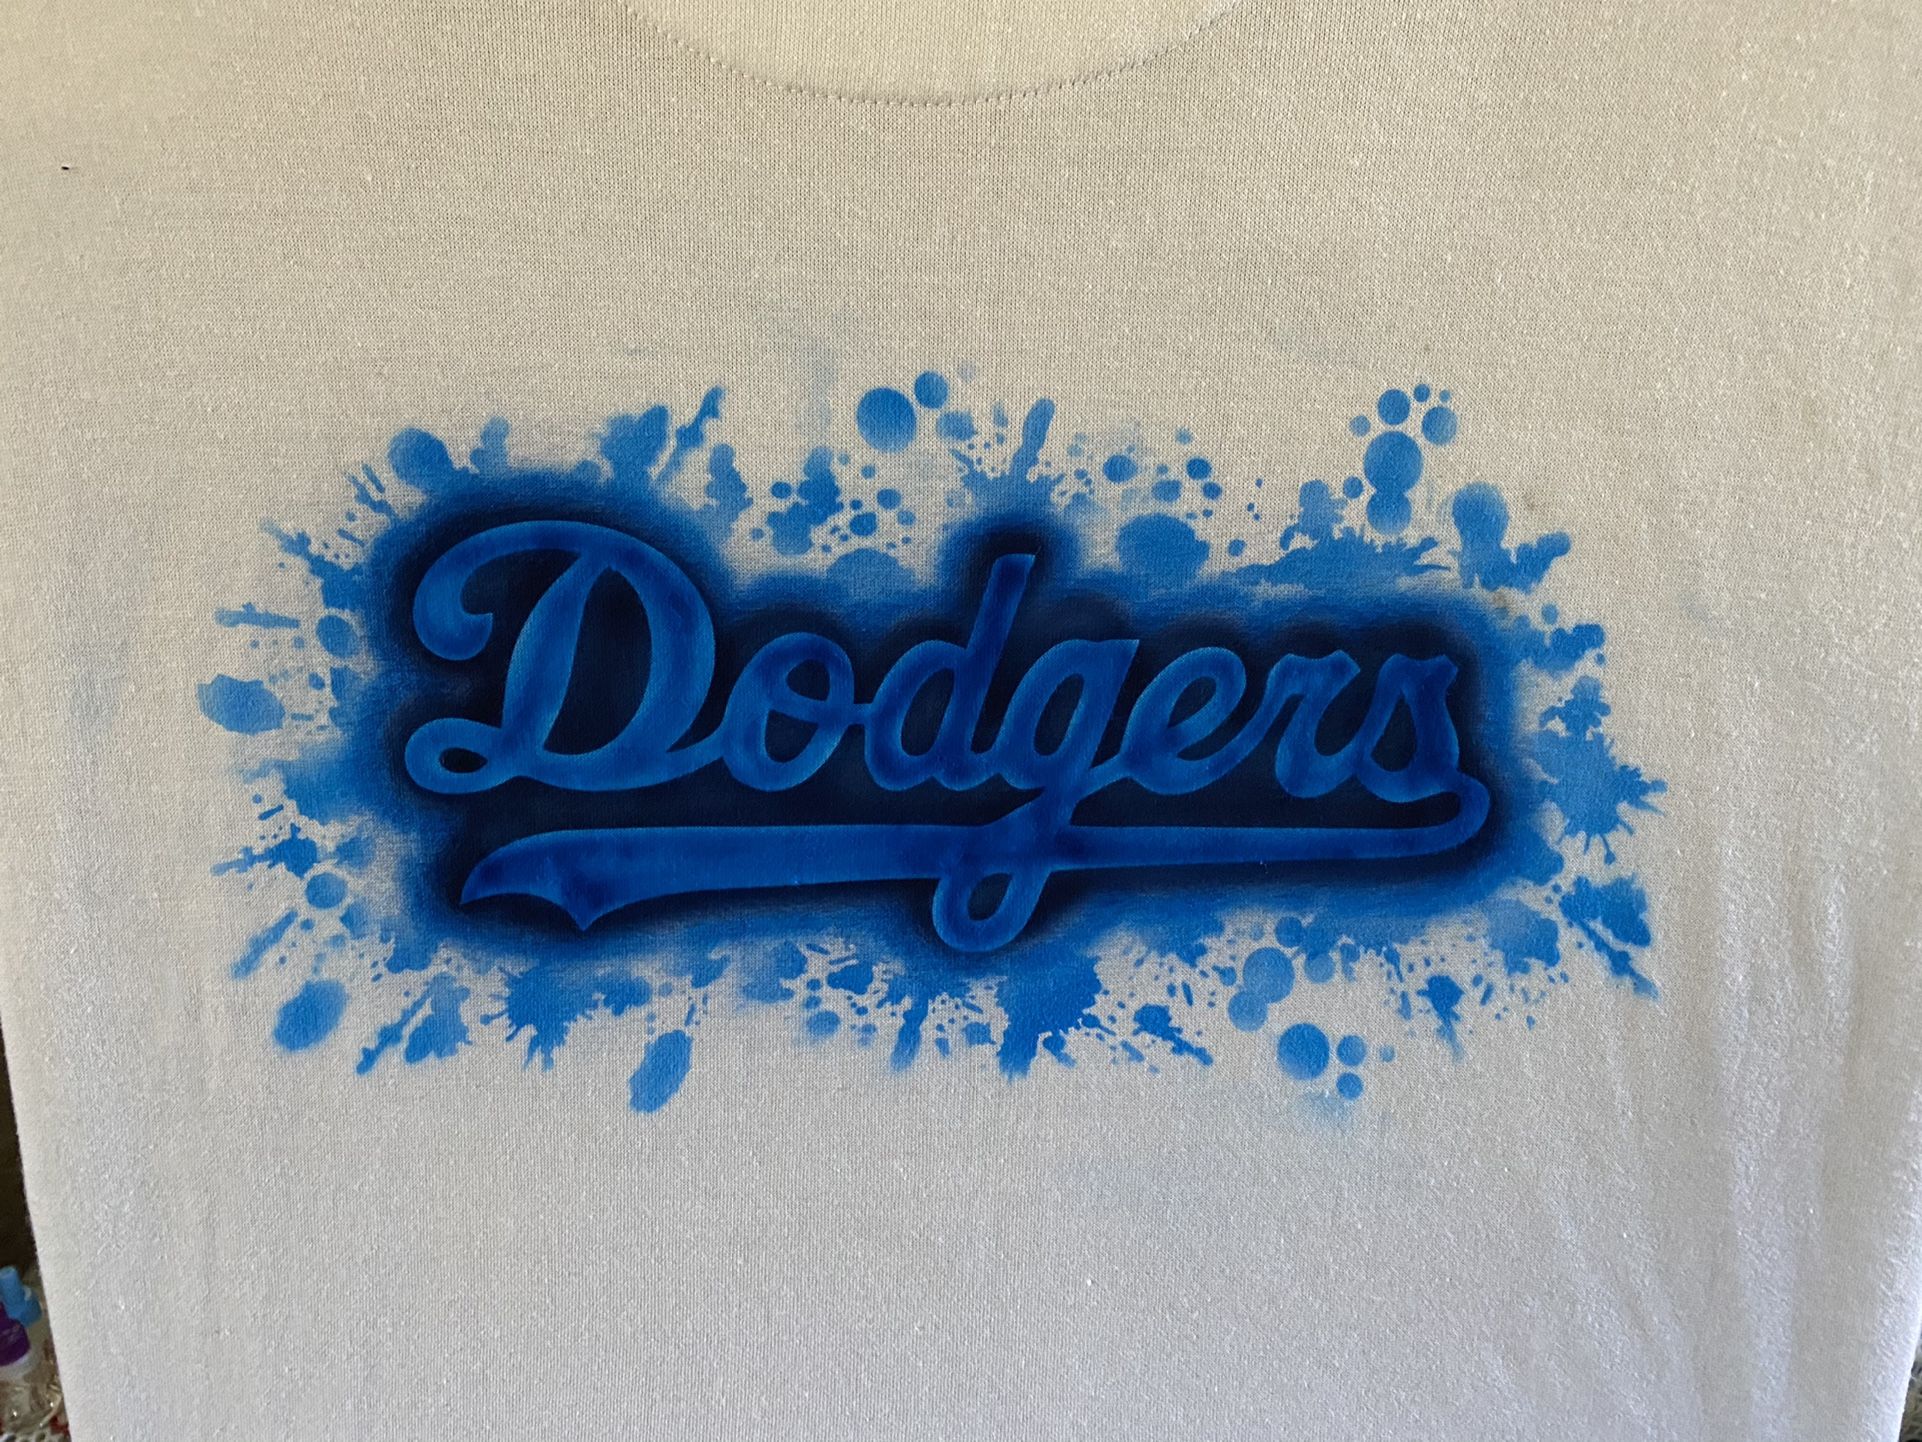 Raiders/Dodgers T-shirt for Sale in San Marcos, CA - OfferUp